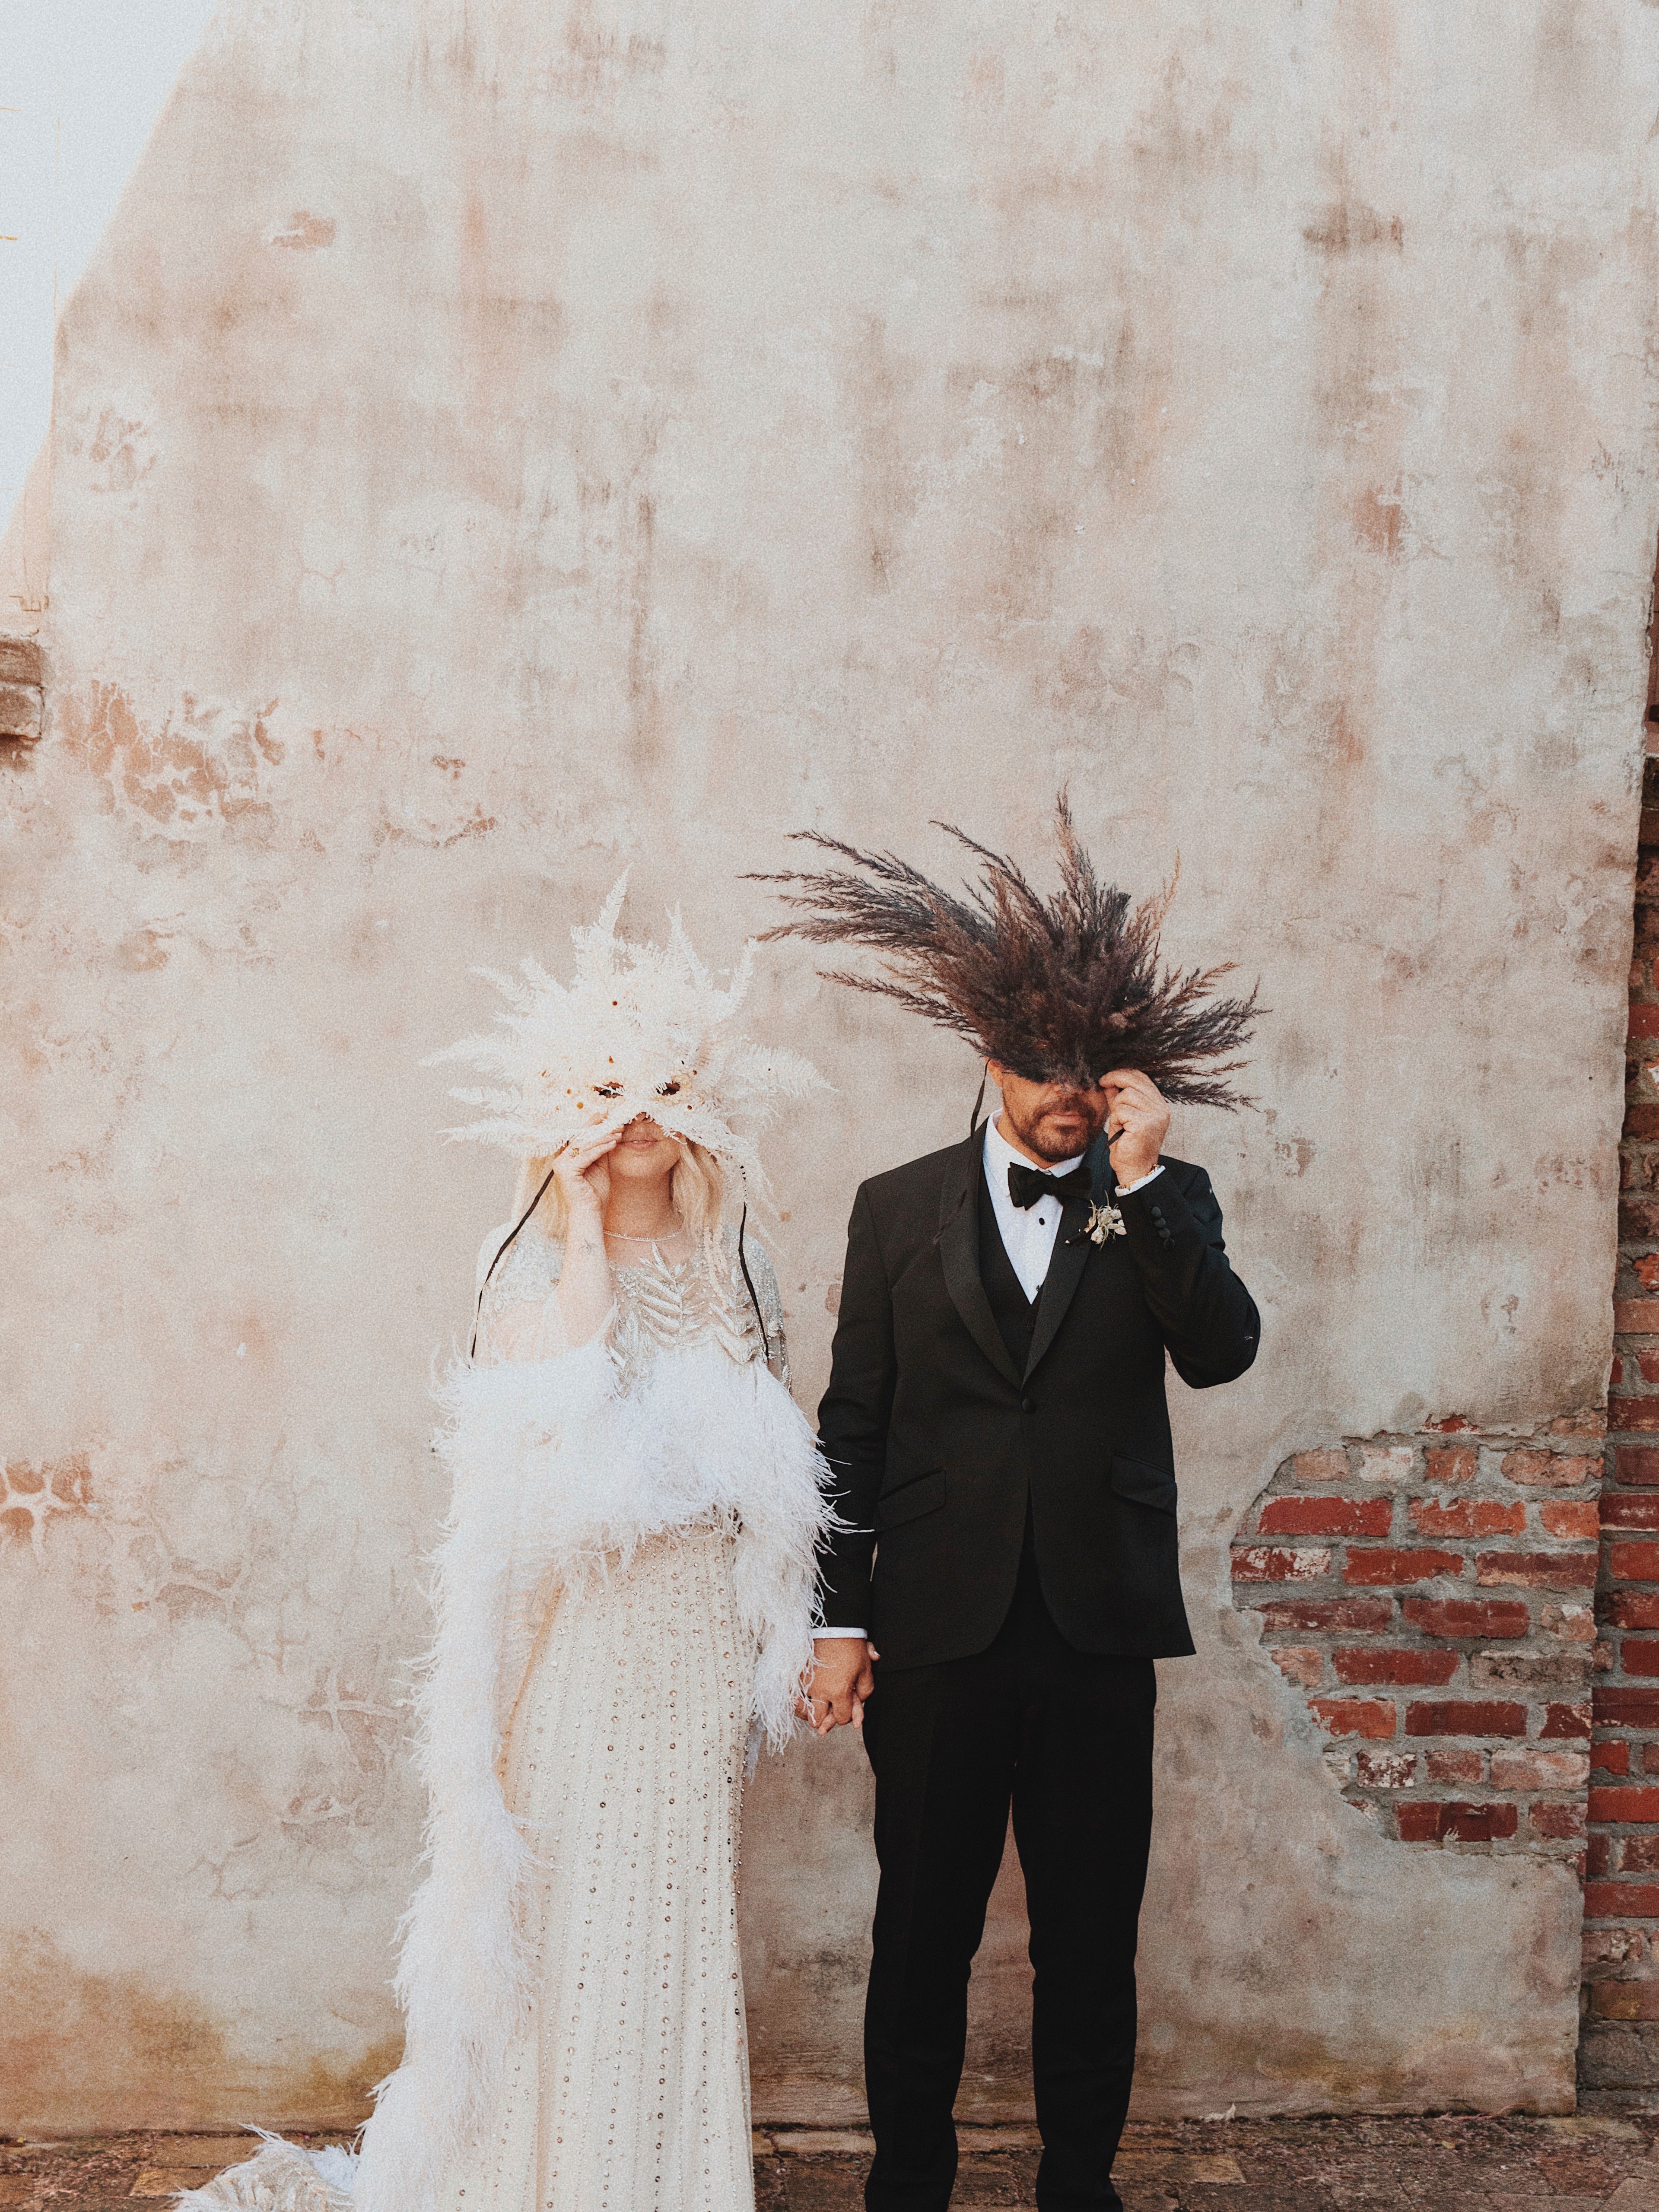 New Orleans Set a Dreamy Scene for This Surprise Ceremony